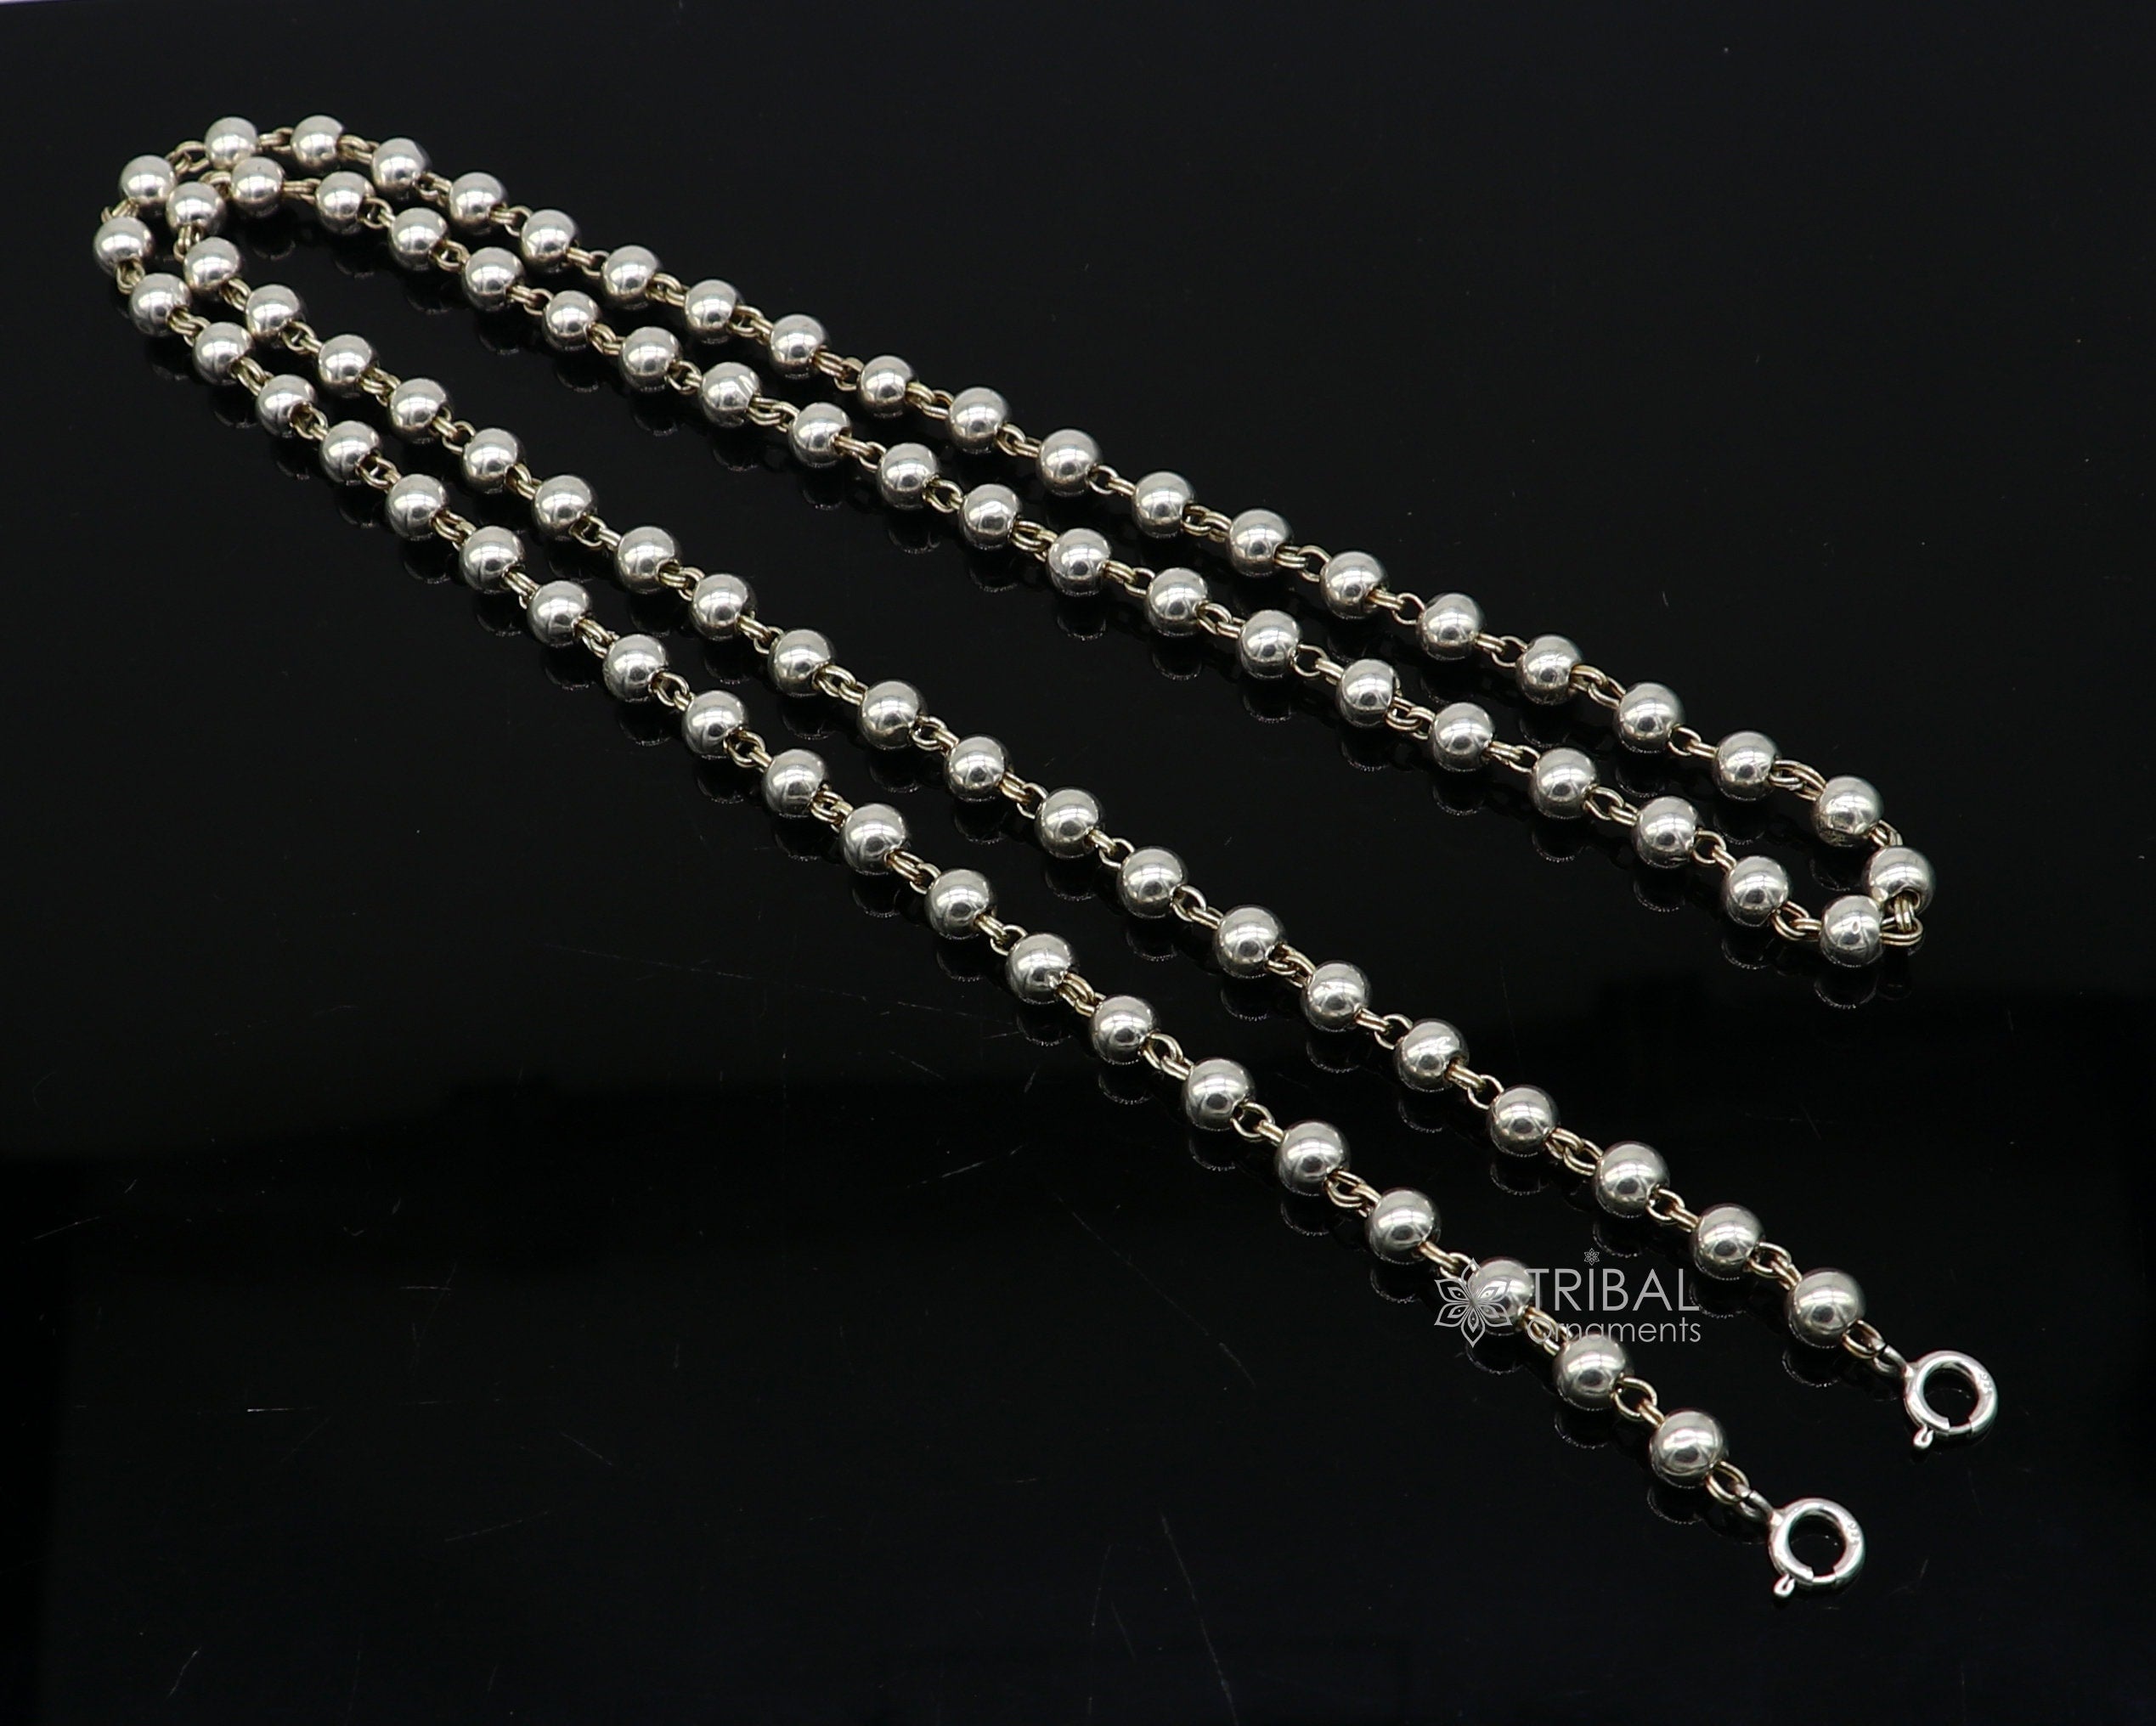 Vintage Sterling Silver Ball Bead Necklace 20-inch Necklace Fine Silver  Chain 104 Grams 28 16 Mm Beads Chunky Heavy Beads - Etsy | Silver bead  necklace, Necklace, 20 inch necklace